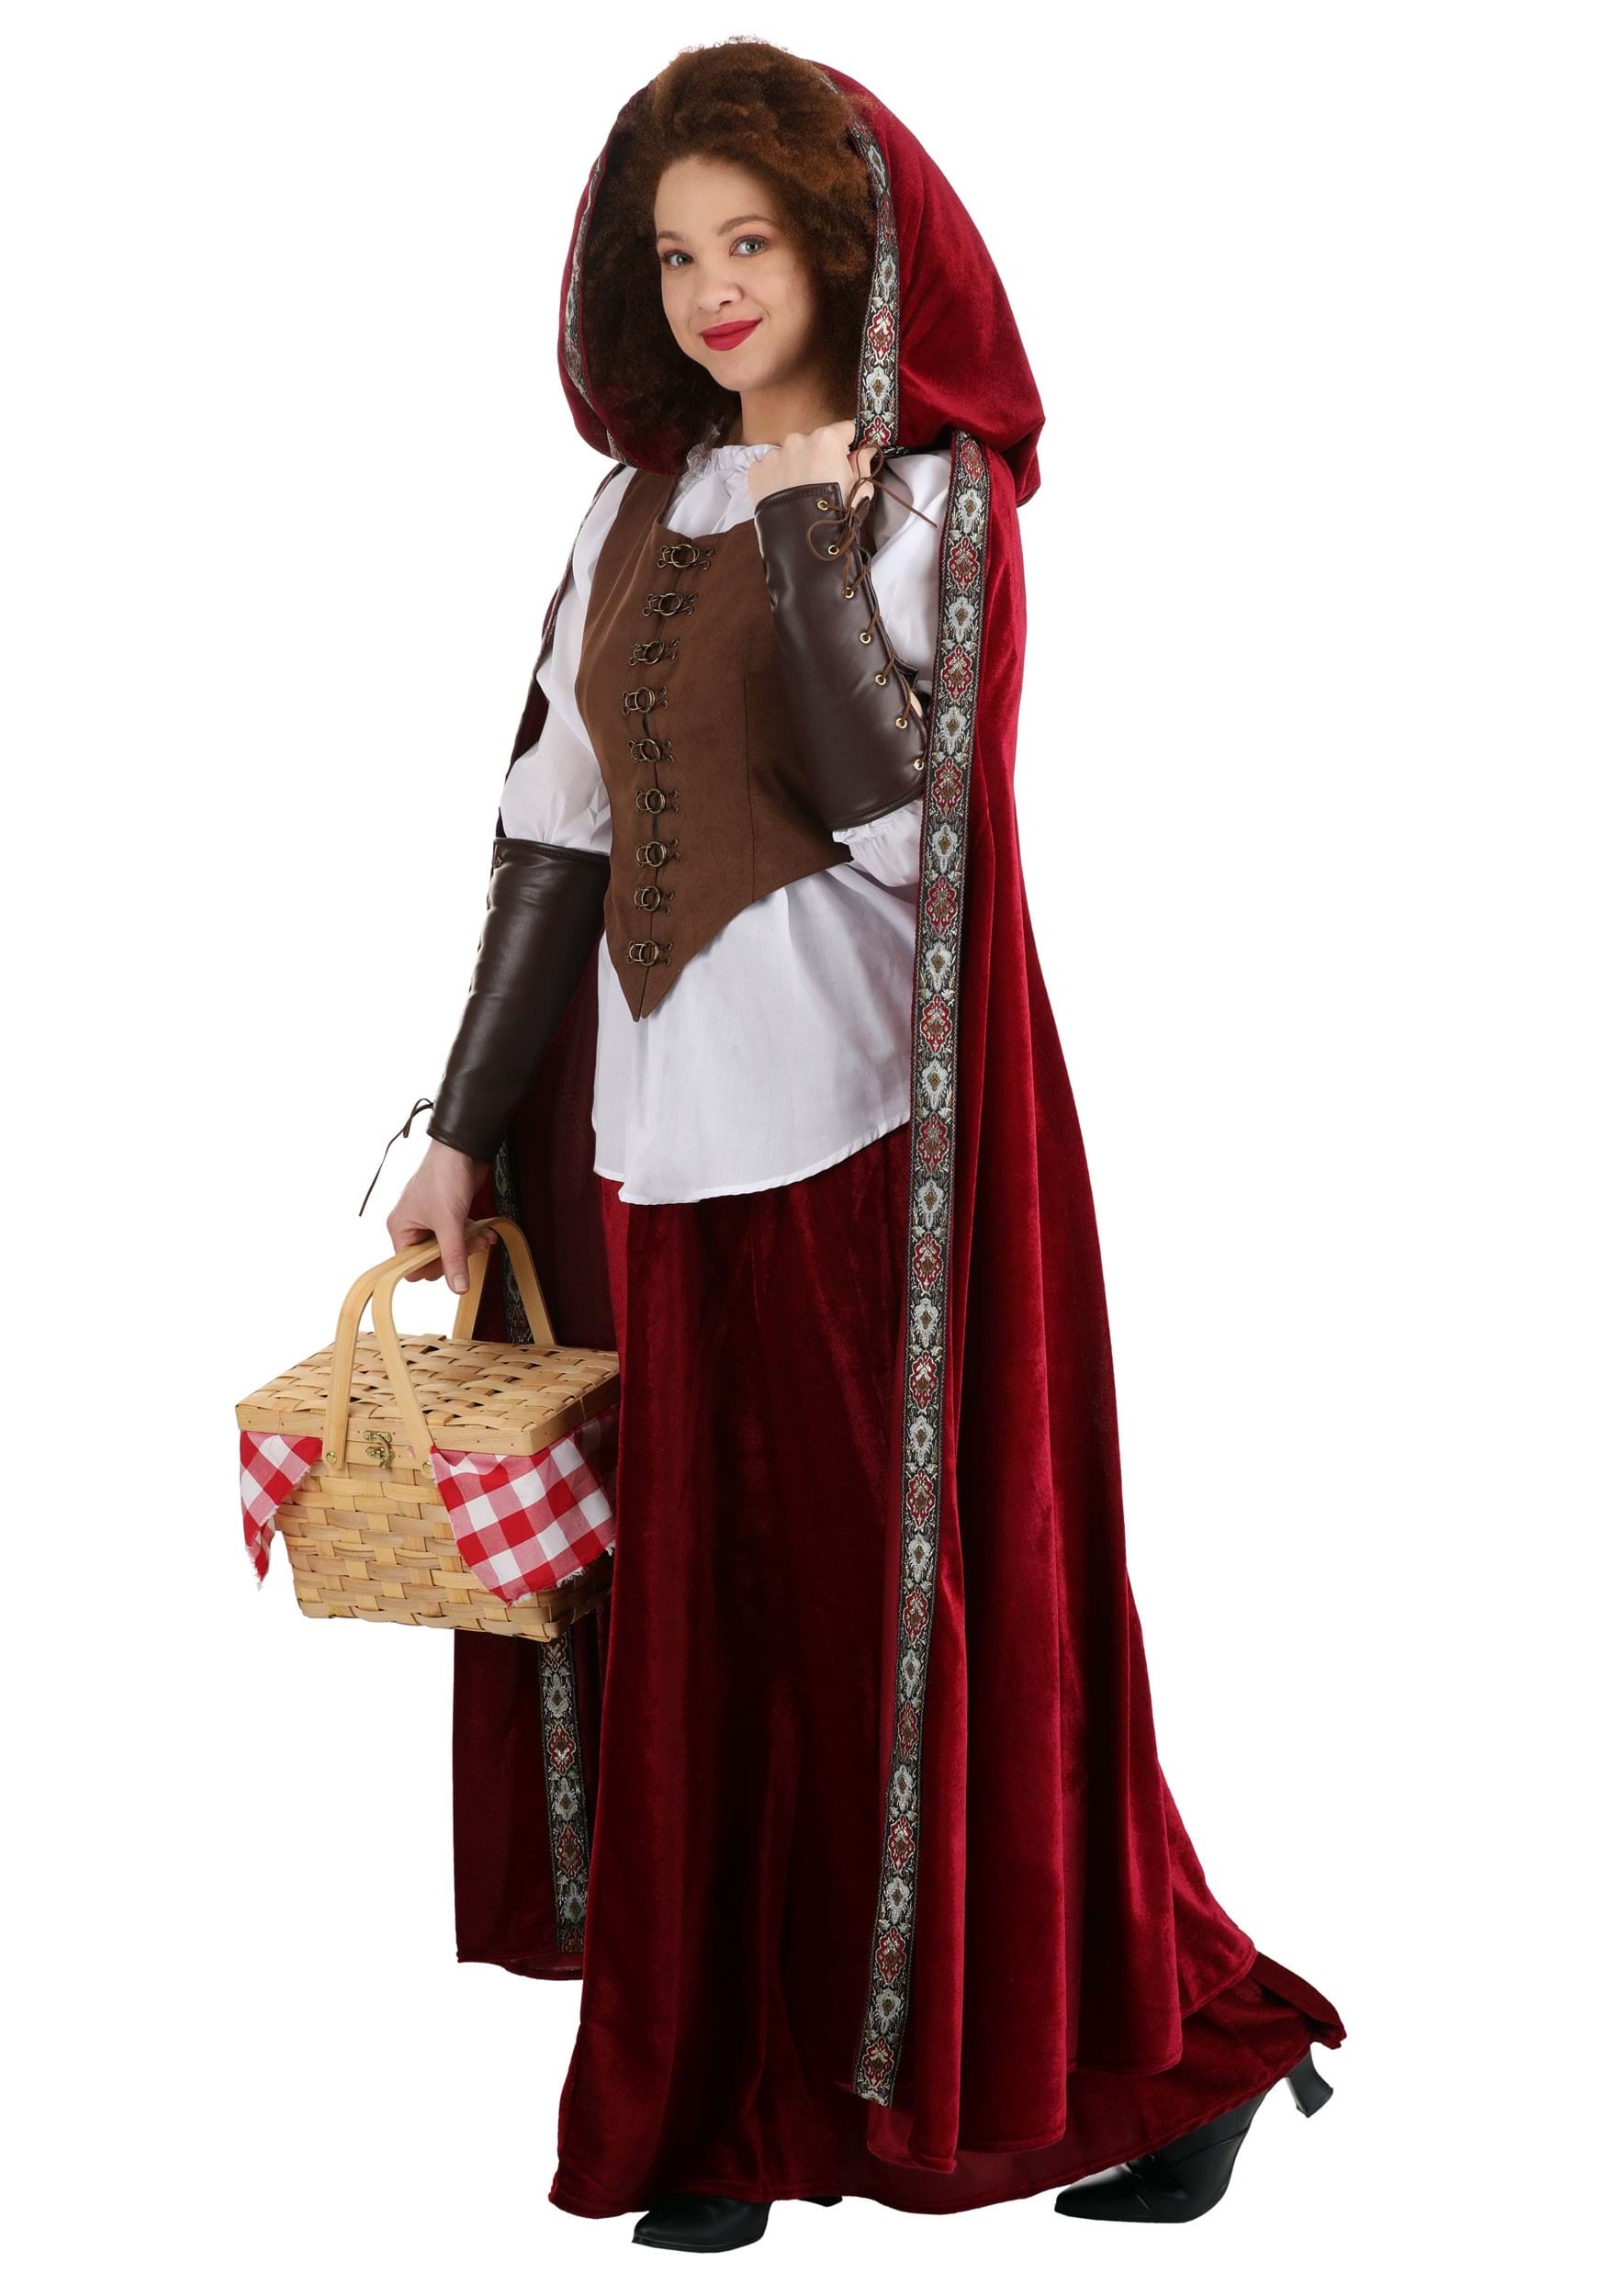 Deluxe Red Riding Hood Costume For Women